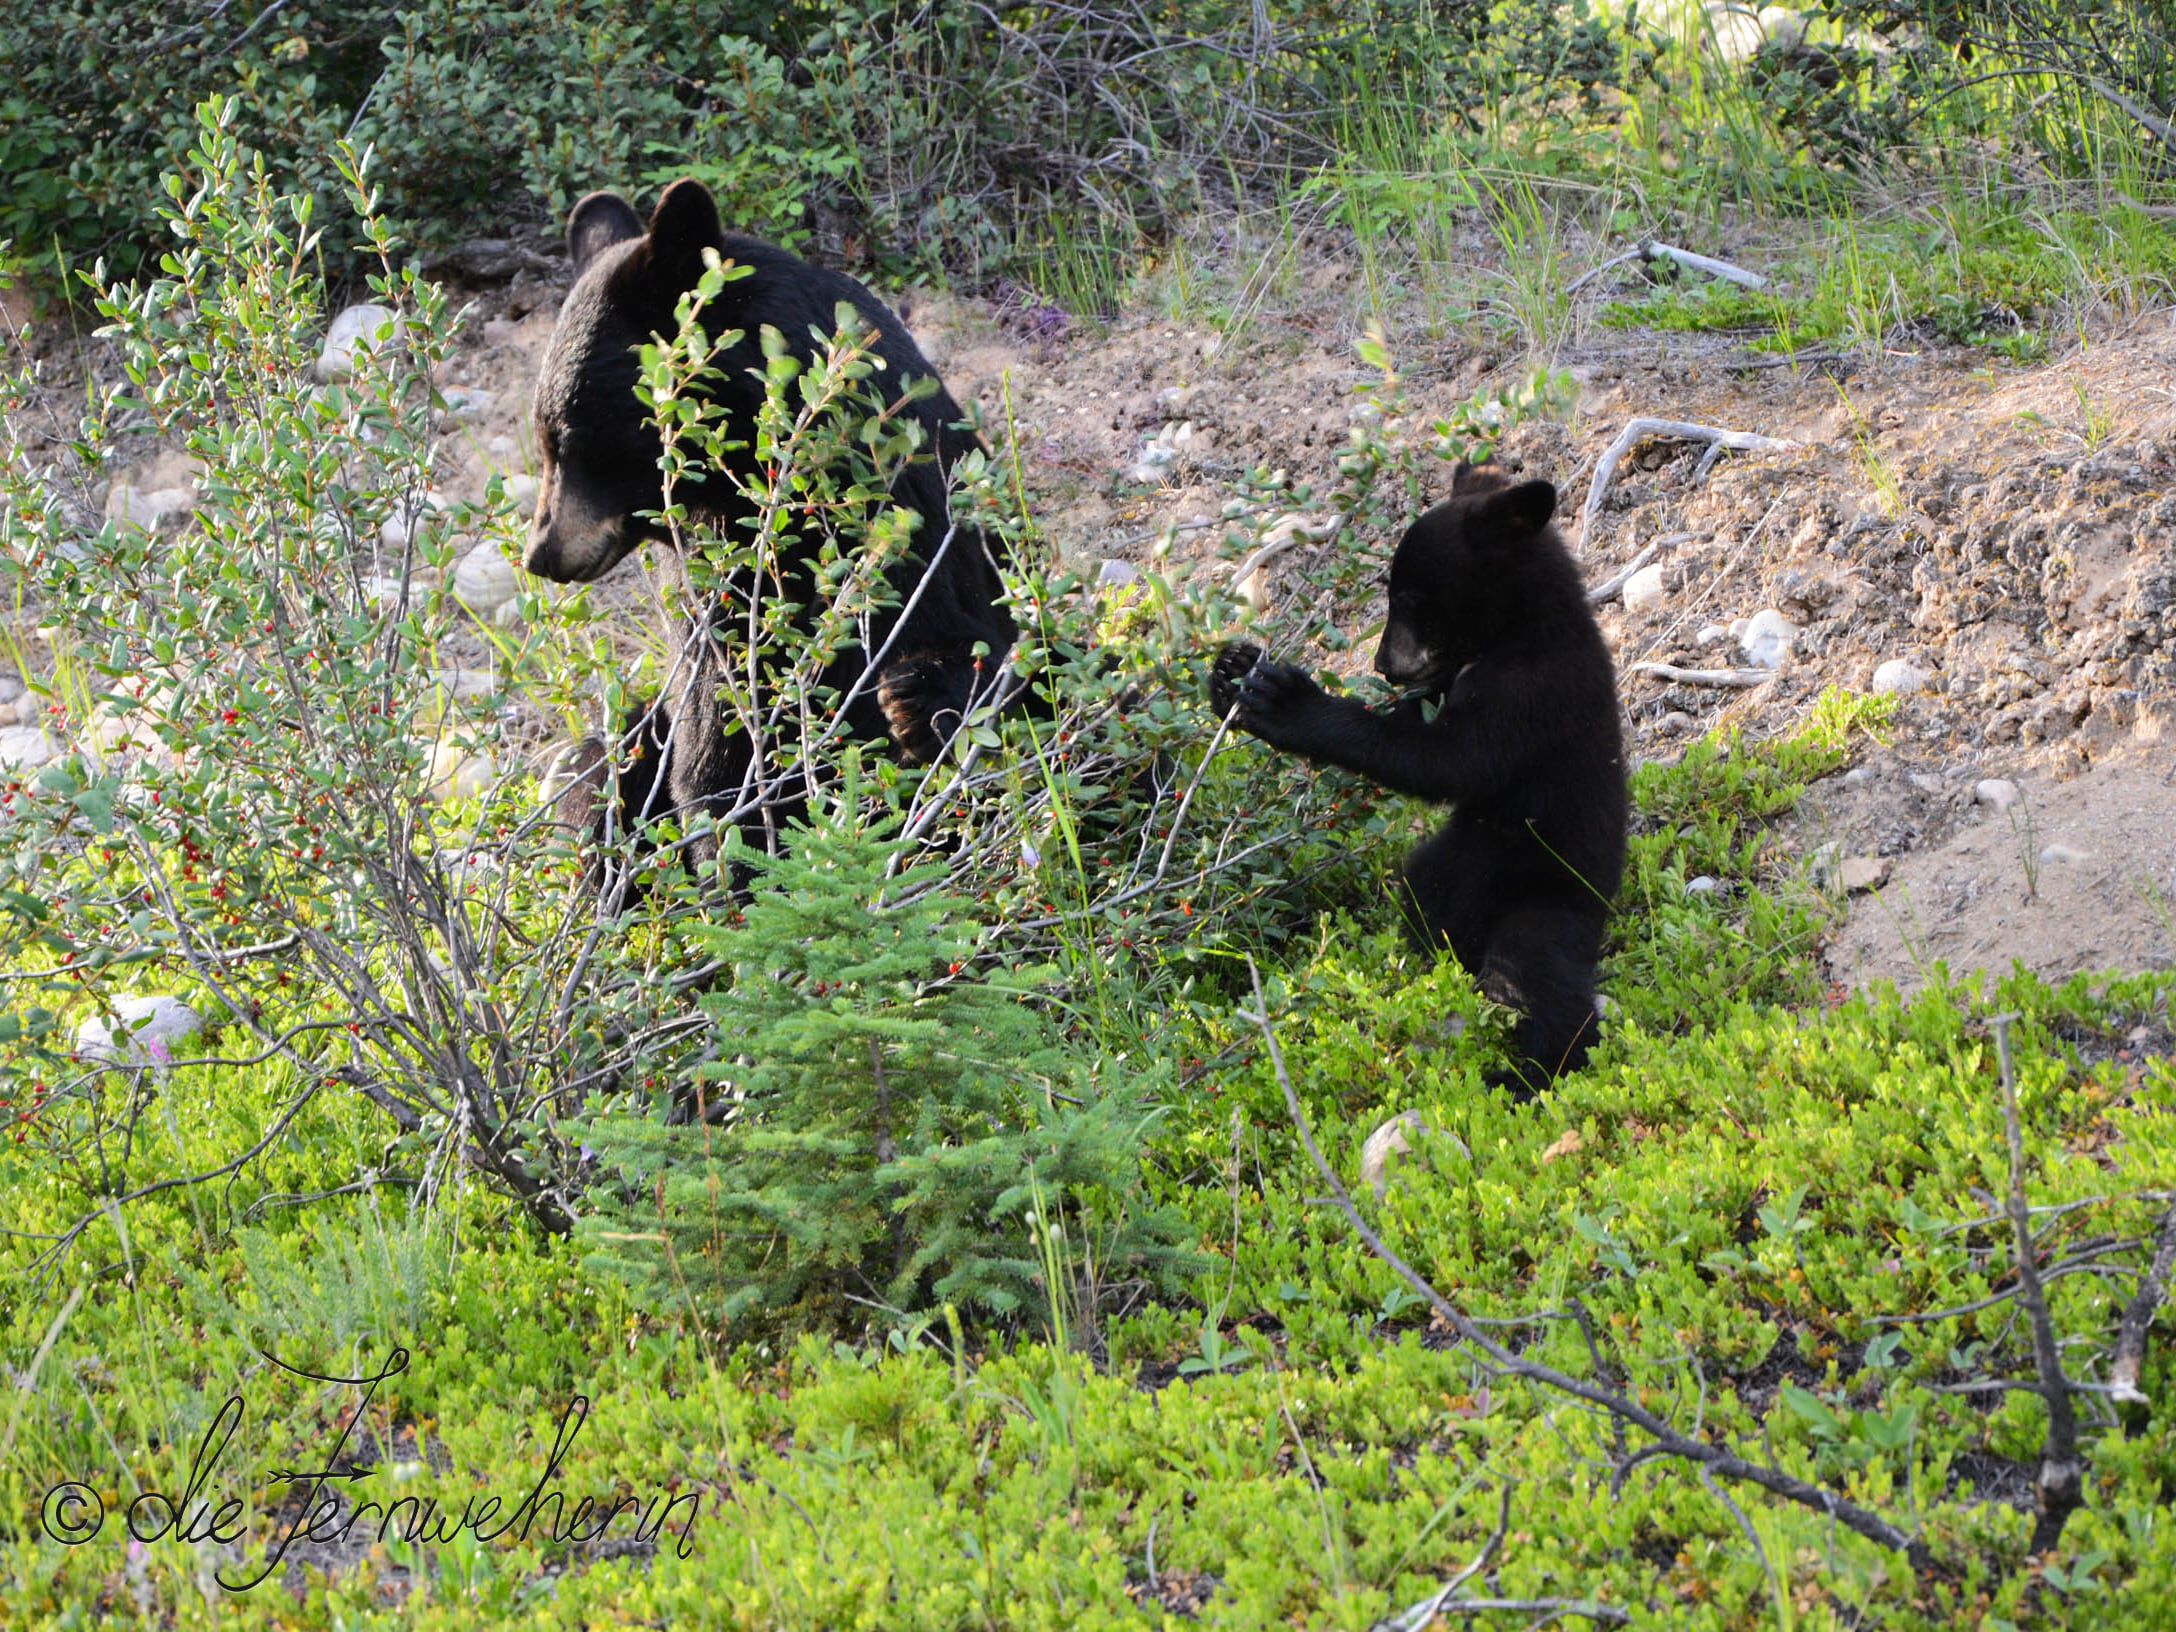 A mother bear shows her cub how to eat berries off a bush.